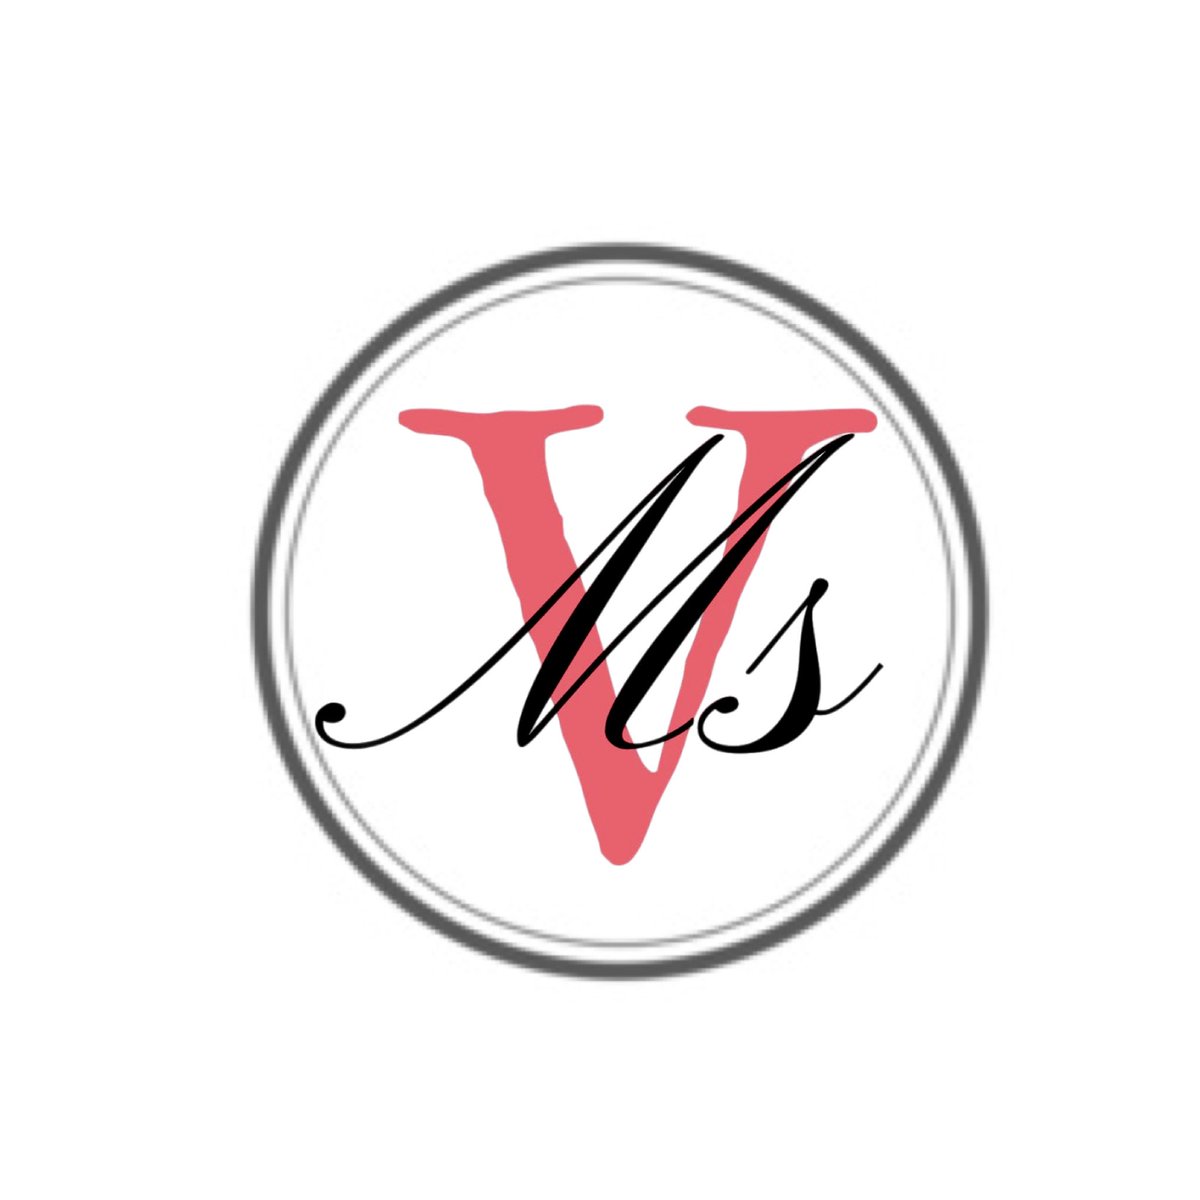 Time for a rebrand! I will no longer go by Ms Visual! I will be going by Ms. V moving forward! I felt it was time to have a more traditional name. The easiest change without going so drastic, was eliminating the moniker “Visual” and just going by the letter “V”.